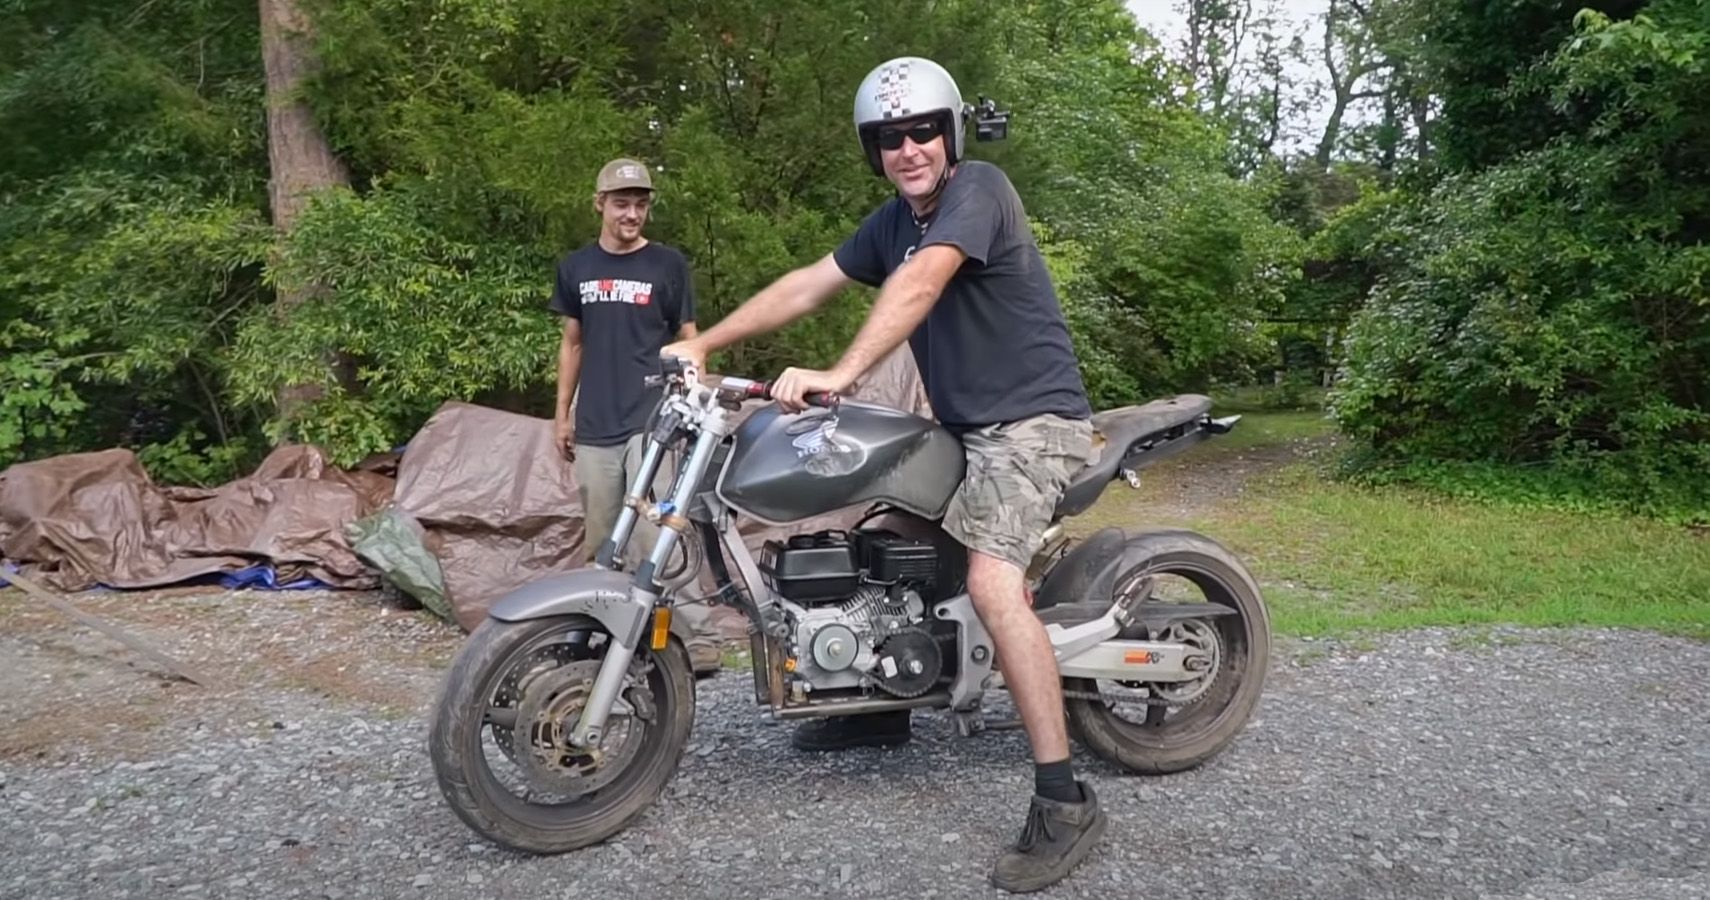 Cars and Camera crew test out a Honda bike using a lawnmower engine